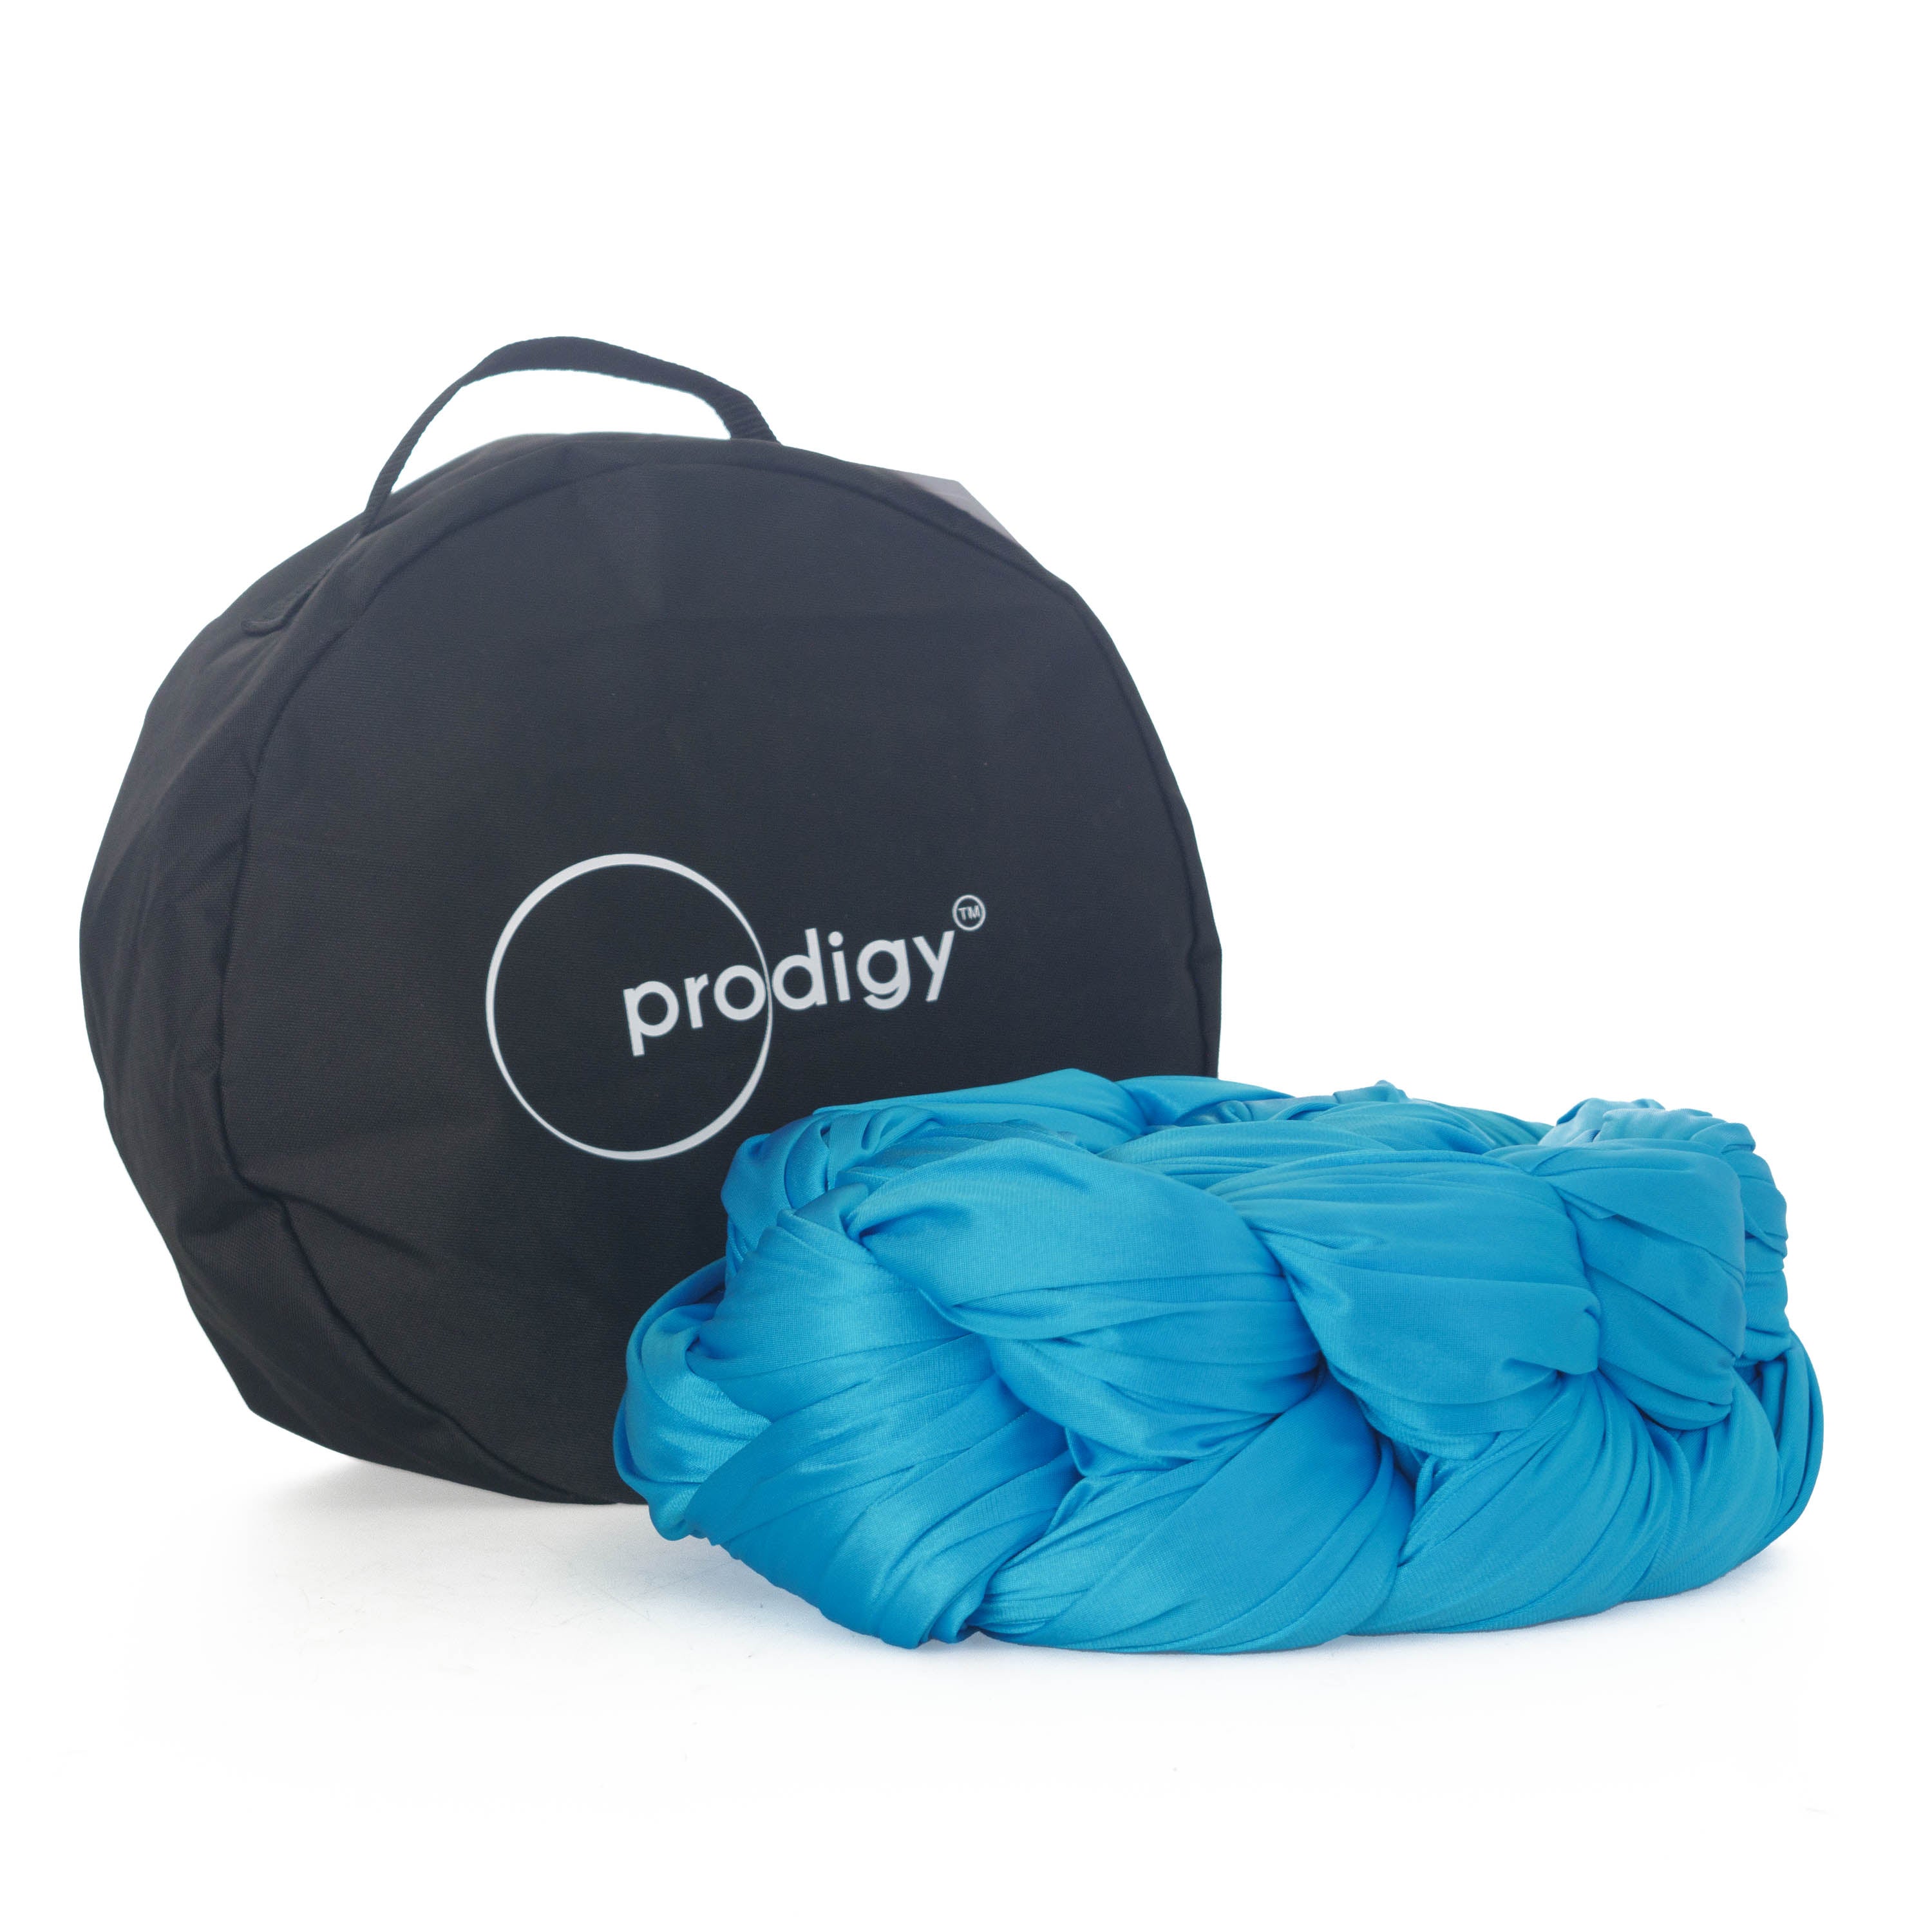 Turquoise Prodigy hammock tied next to bag